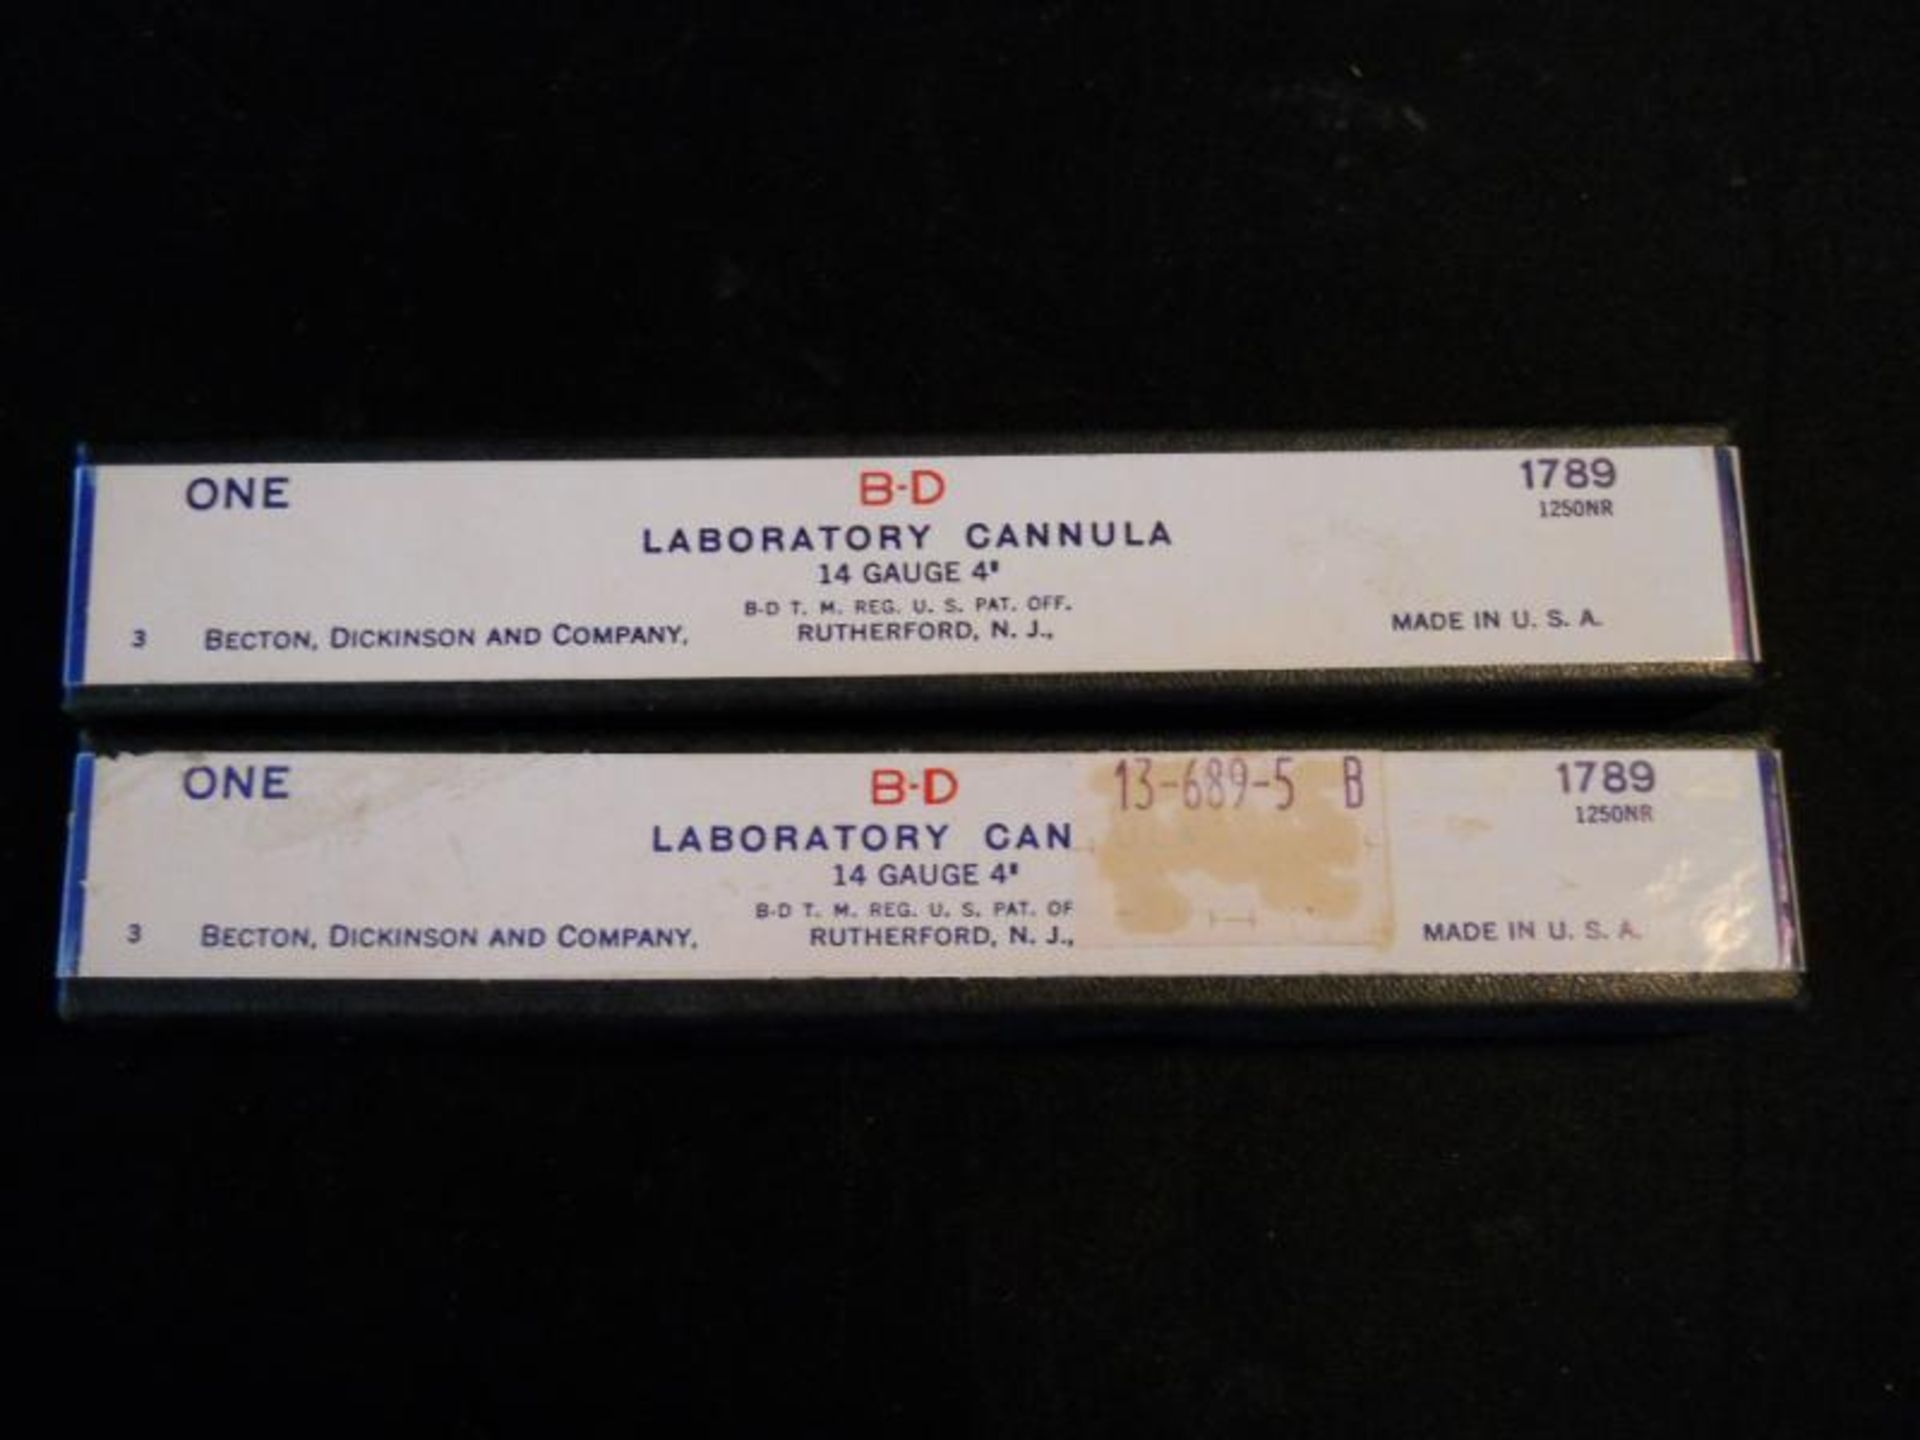 Lot of 2 Becton Dickinson B-D BD 14 Gauge 4" Laboratory Cannula 1789 1250NR, Qty 1, 331030762779